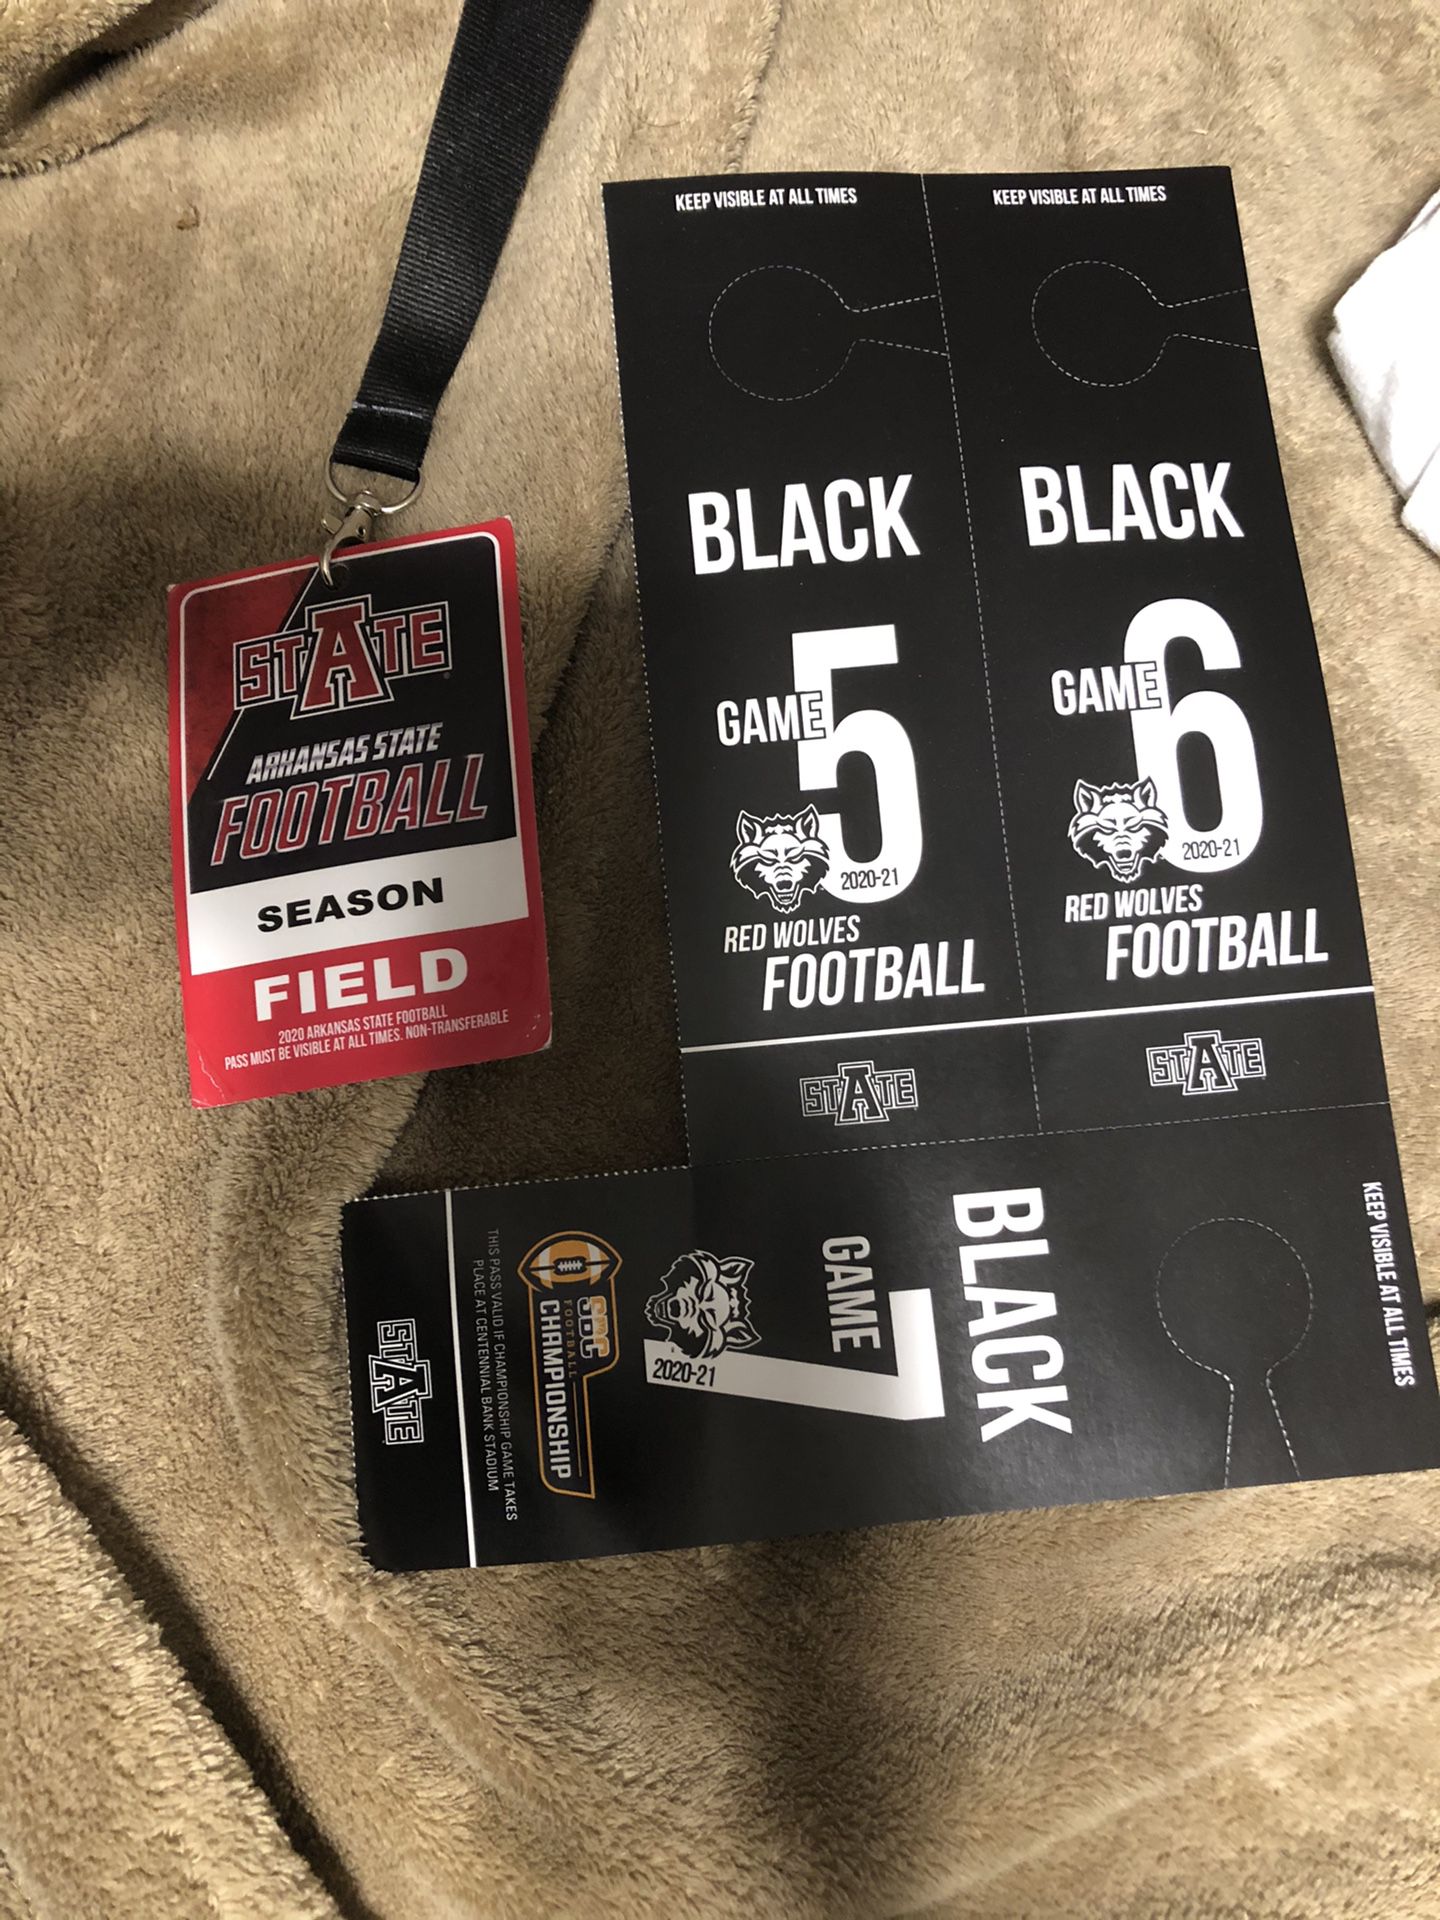 2020 black parking passes for games 5,6,7 plus field pass use at own risk